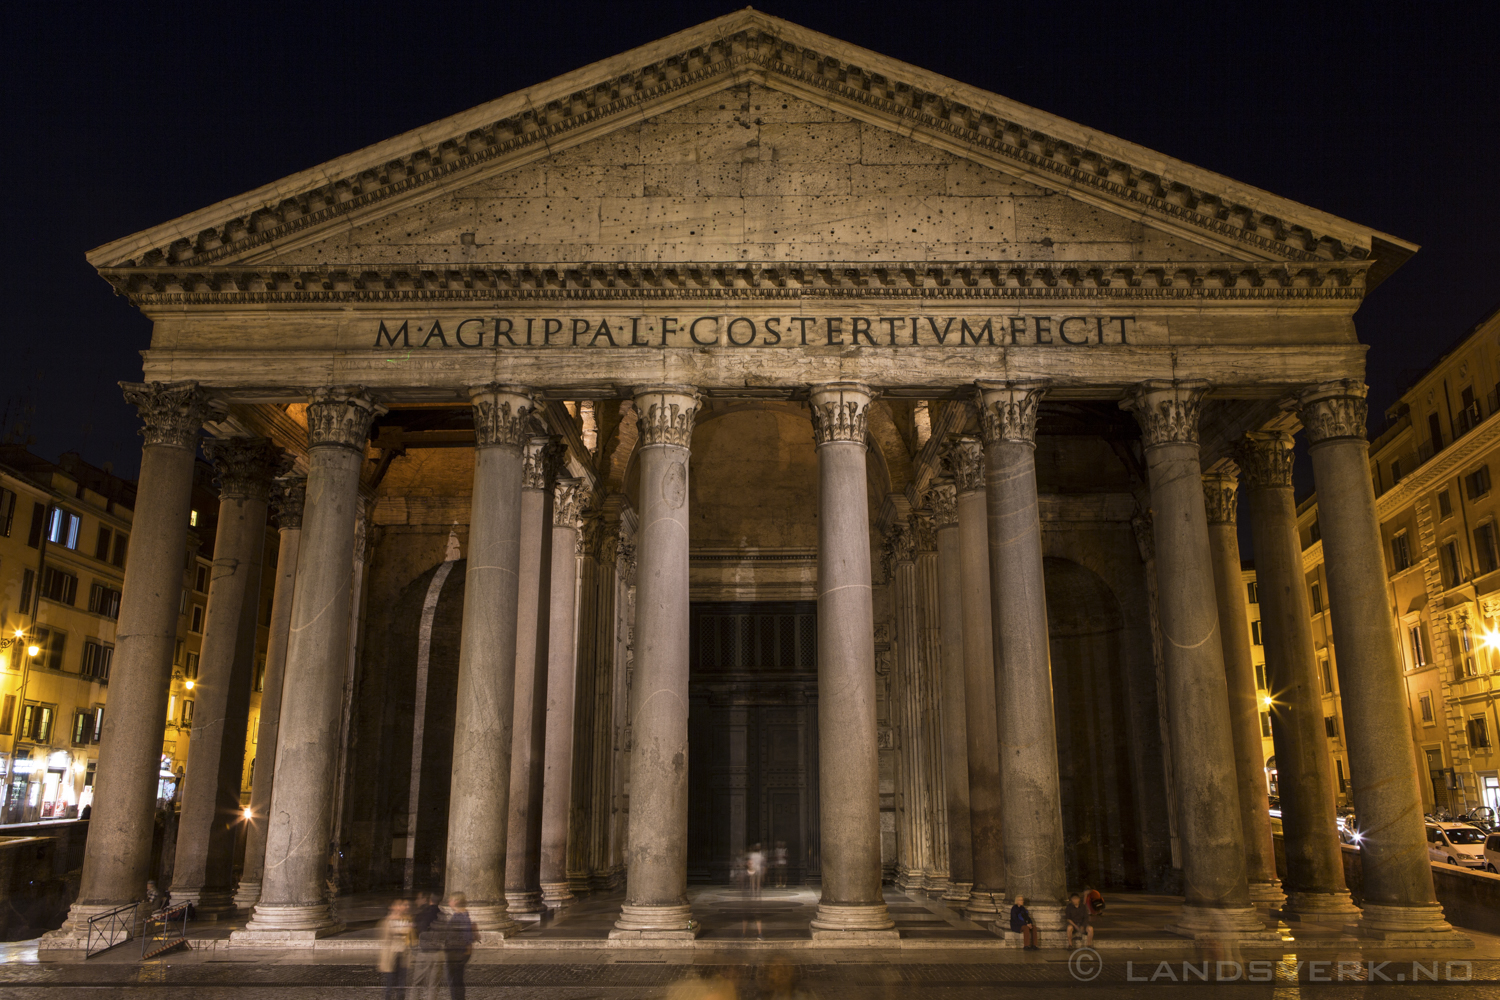 Just a classic shot of Pantheon. Because, why not. Rome, Italy. 

(Canon EOS 5D Mark III / Canon EF 24-70mm f/2.8 L USM)